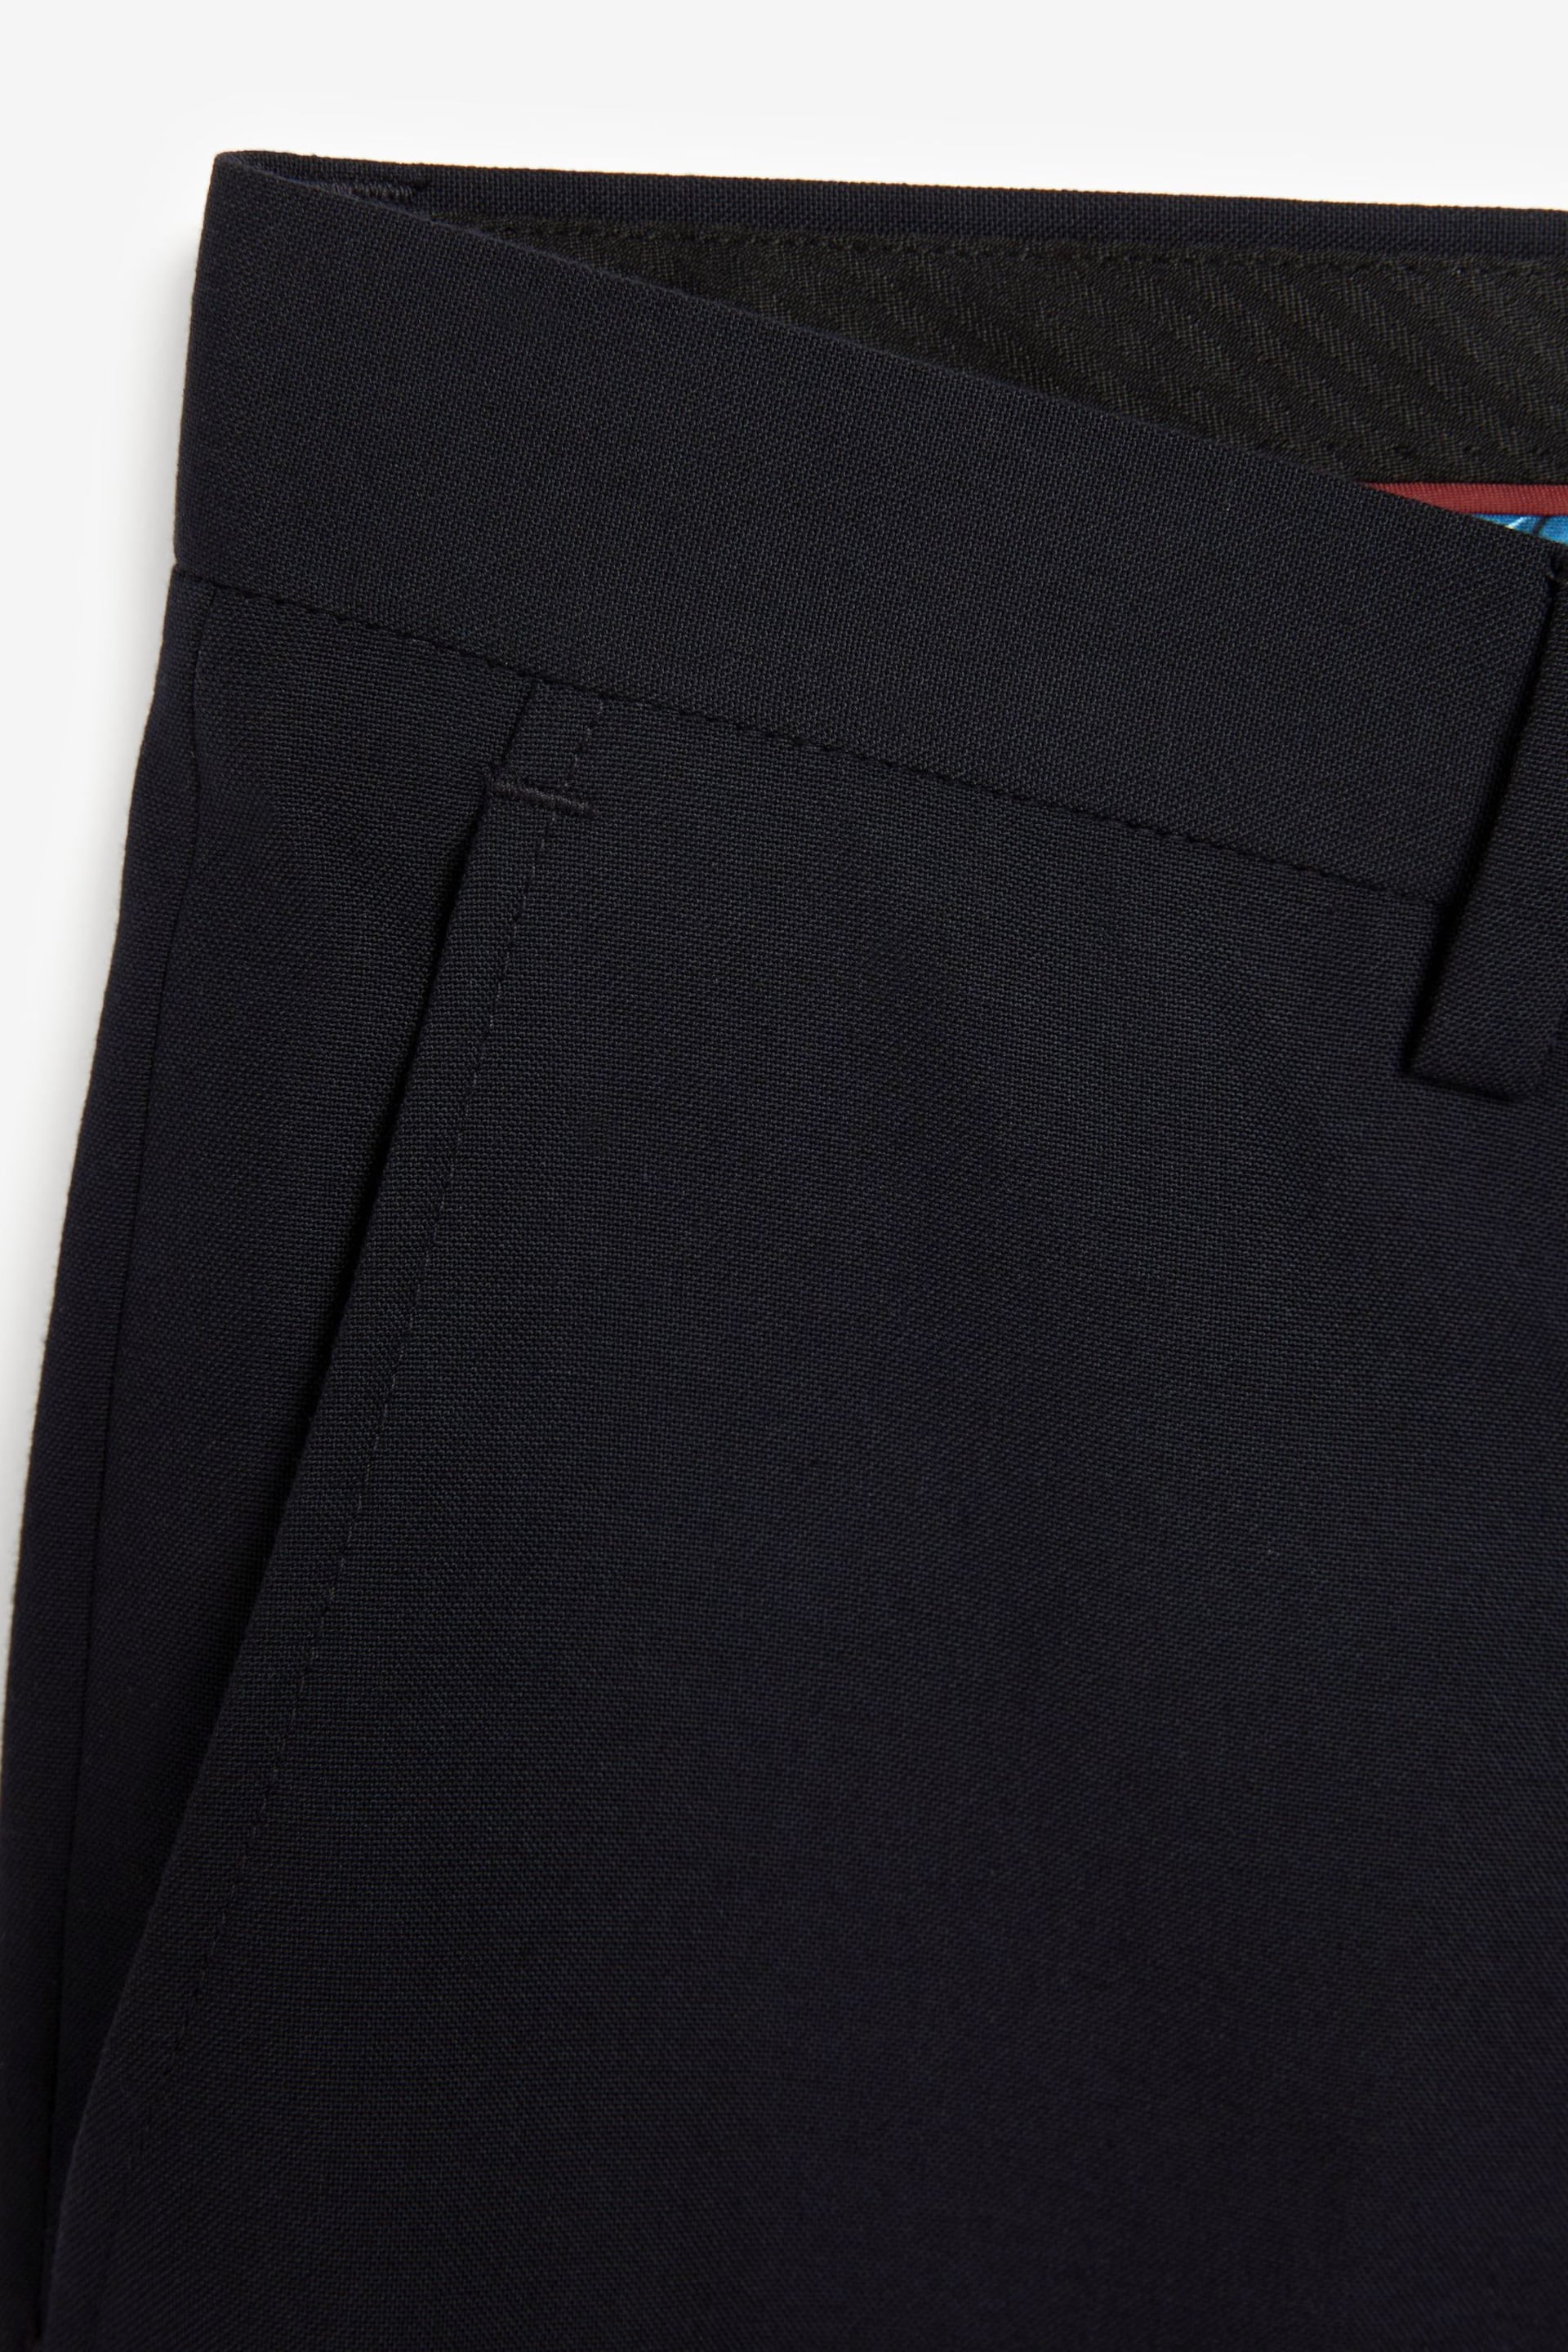 Navy Blue Slim Suit Trousers - Image 6 of 7